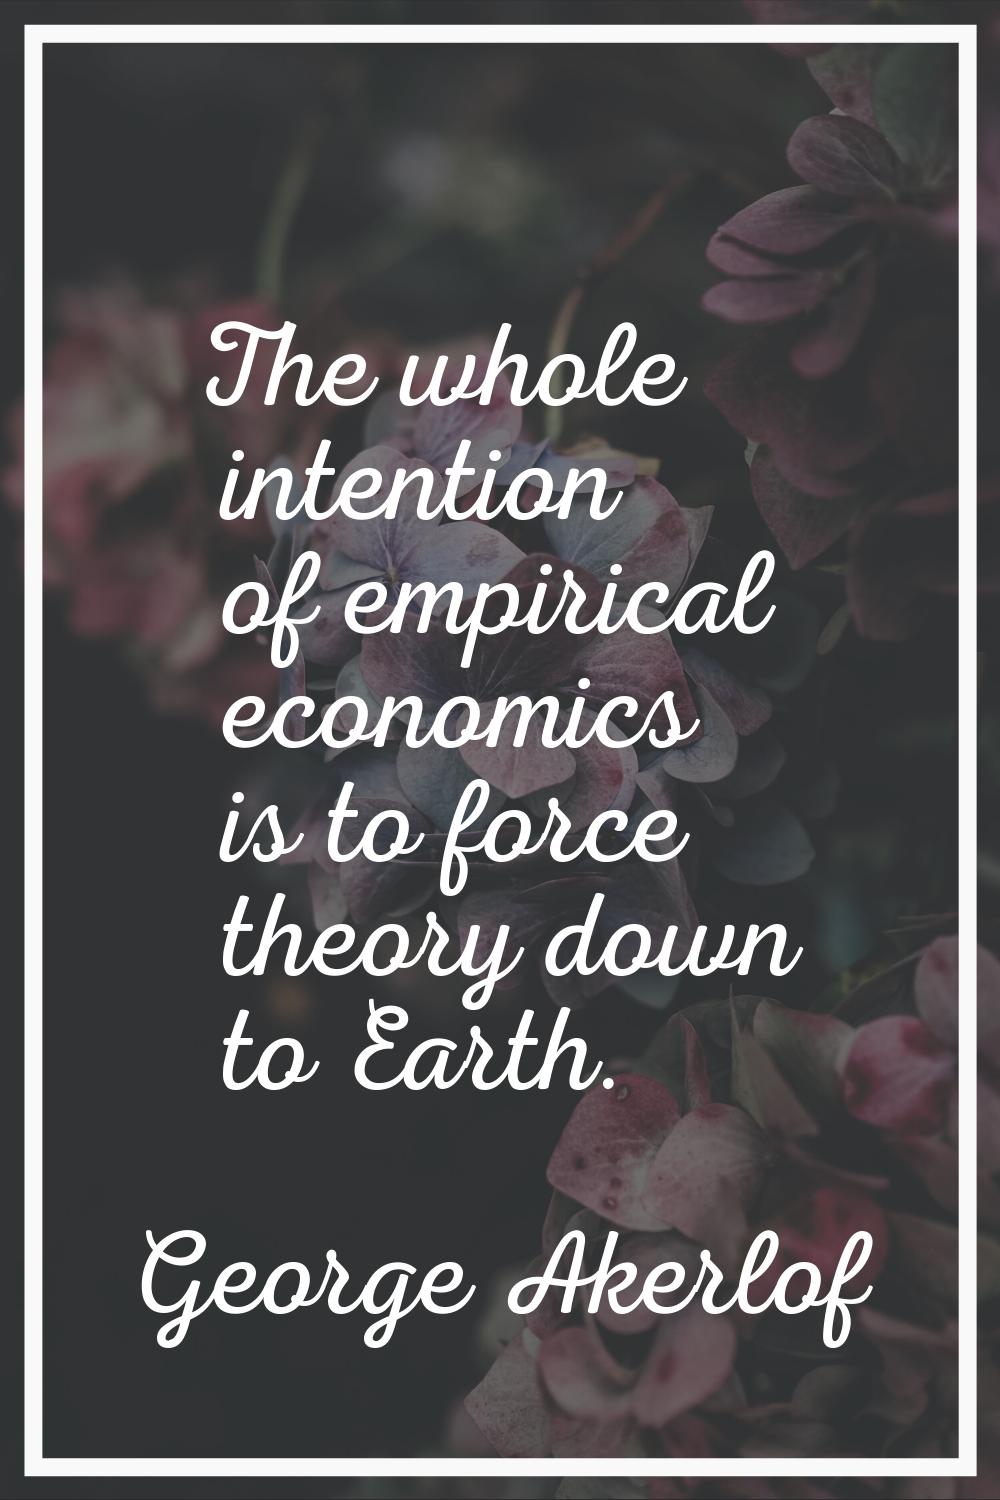 The whole intention of empirical economics is to force theory down to Earth.